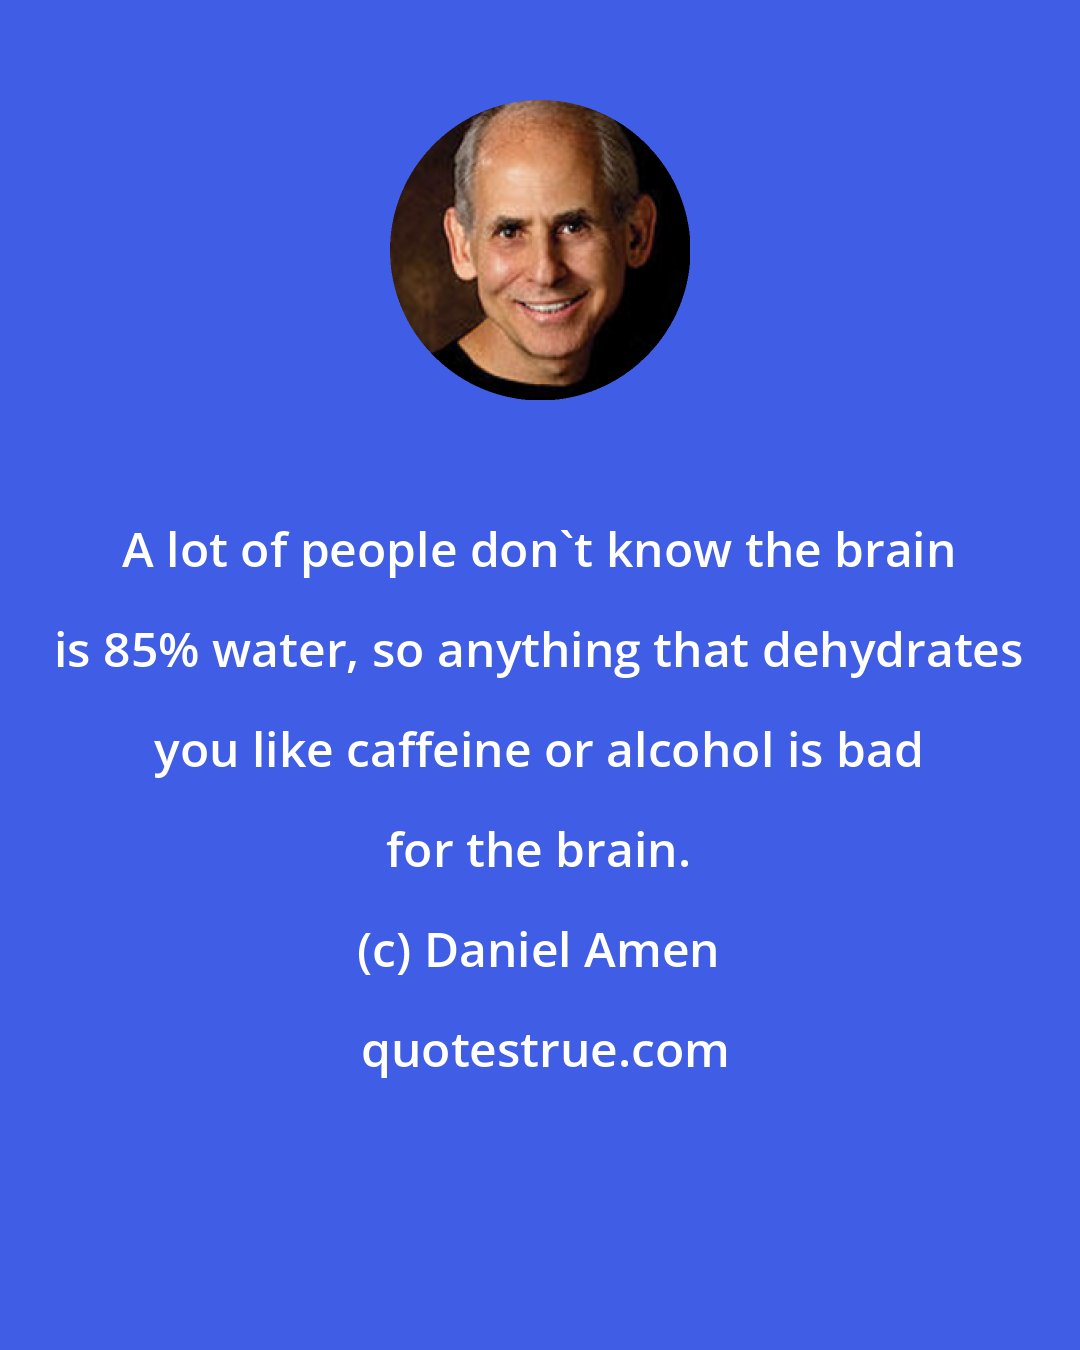 Daniel Amen: A lot of people don't know the brain is 85% water, so anything that dehydrates you like caffeine or alcohol is bad for the brain.